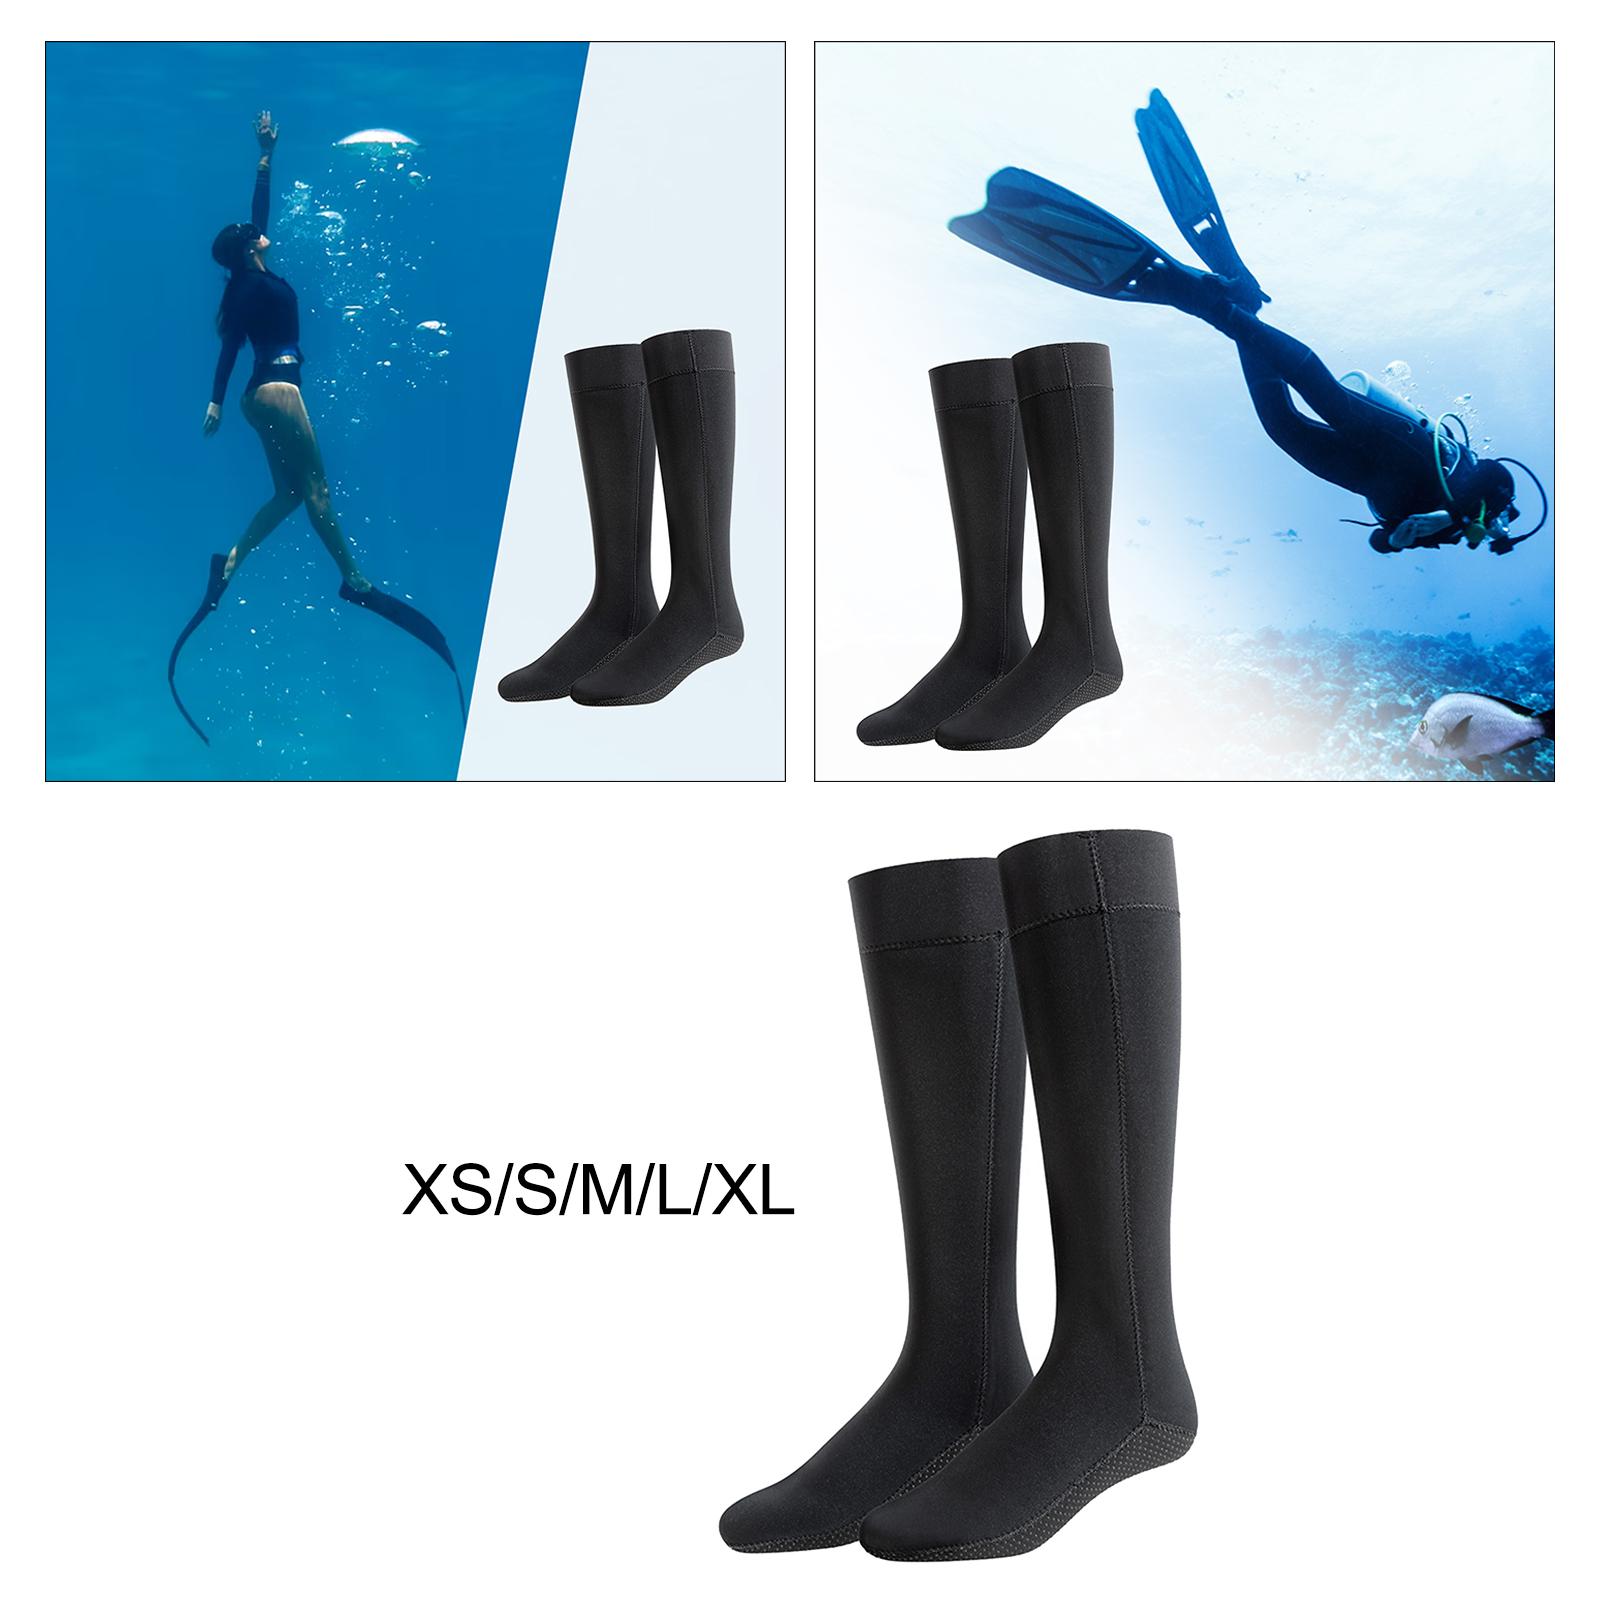 Diving Socks Warm Flexible Wetsuit Booties for Kayaking Water Sports Surfing 35-37